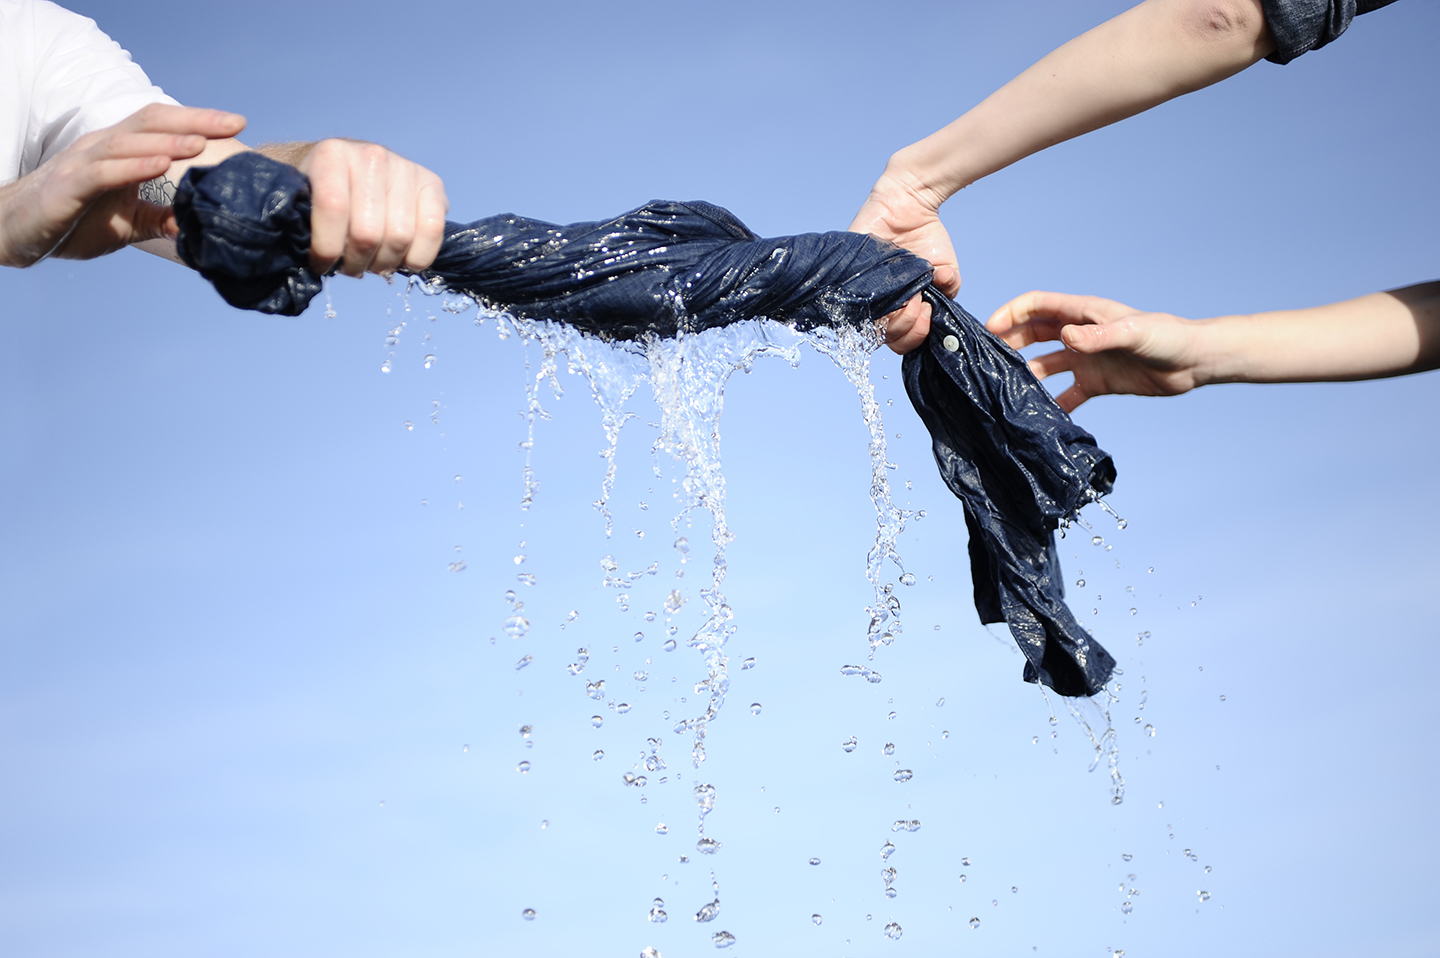 Recycling Water to Make Your Jeans - Levi Strauss & Co : Levi Strauss & Co